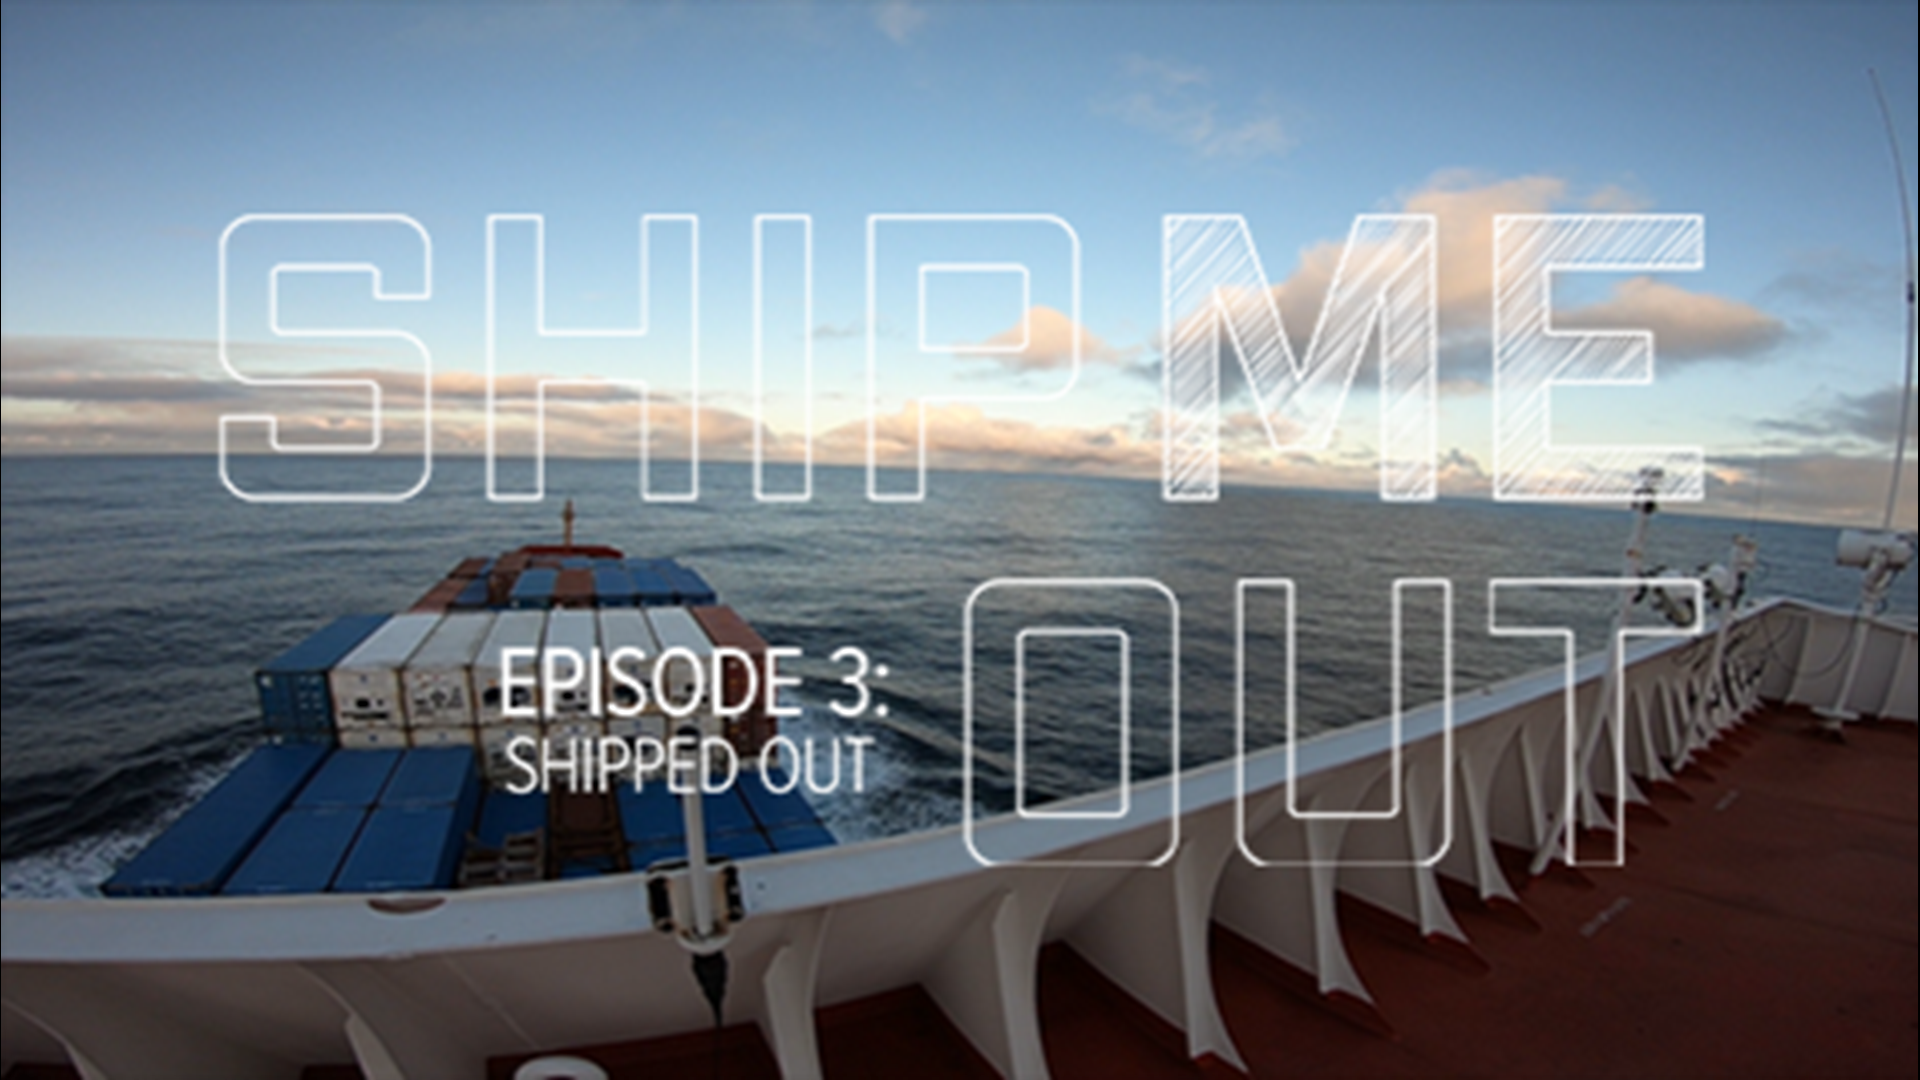 A first-hand look at life on a container ship. This is Episode 3 of Ship Me Out.